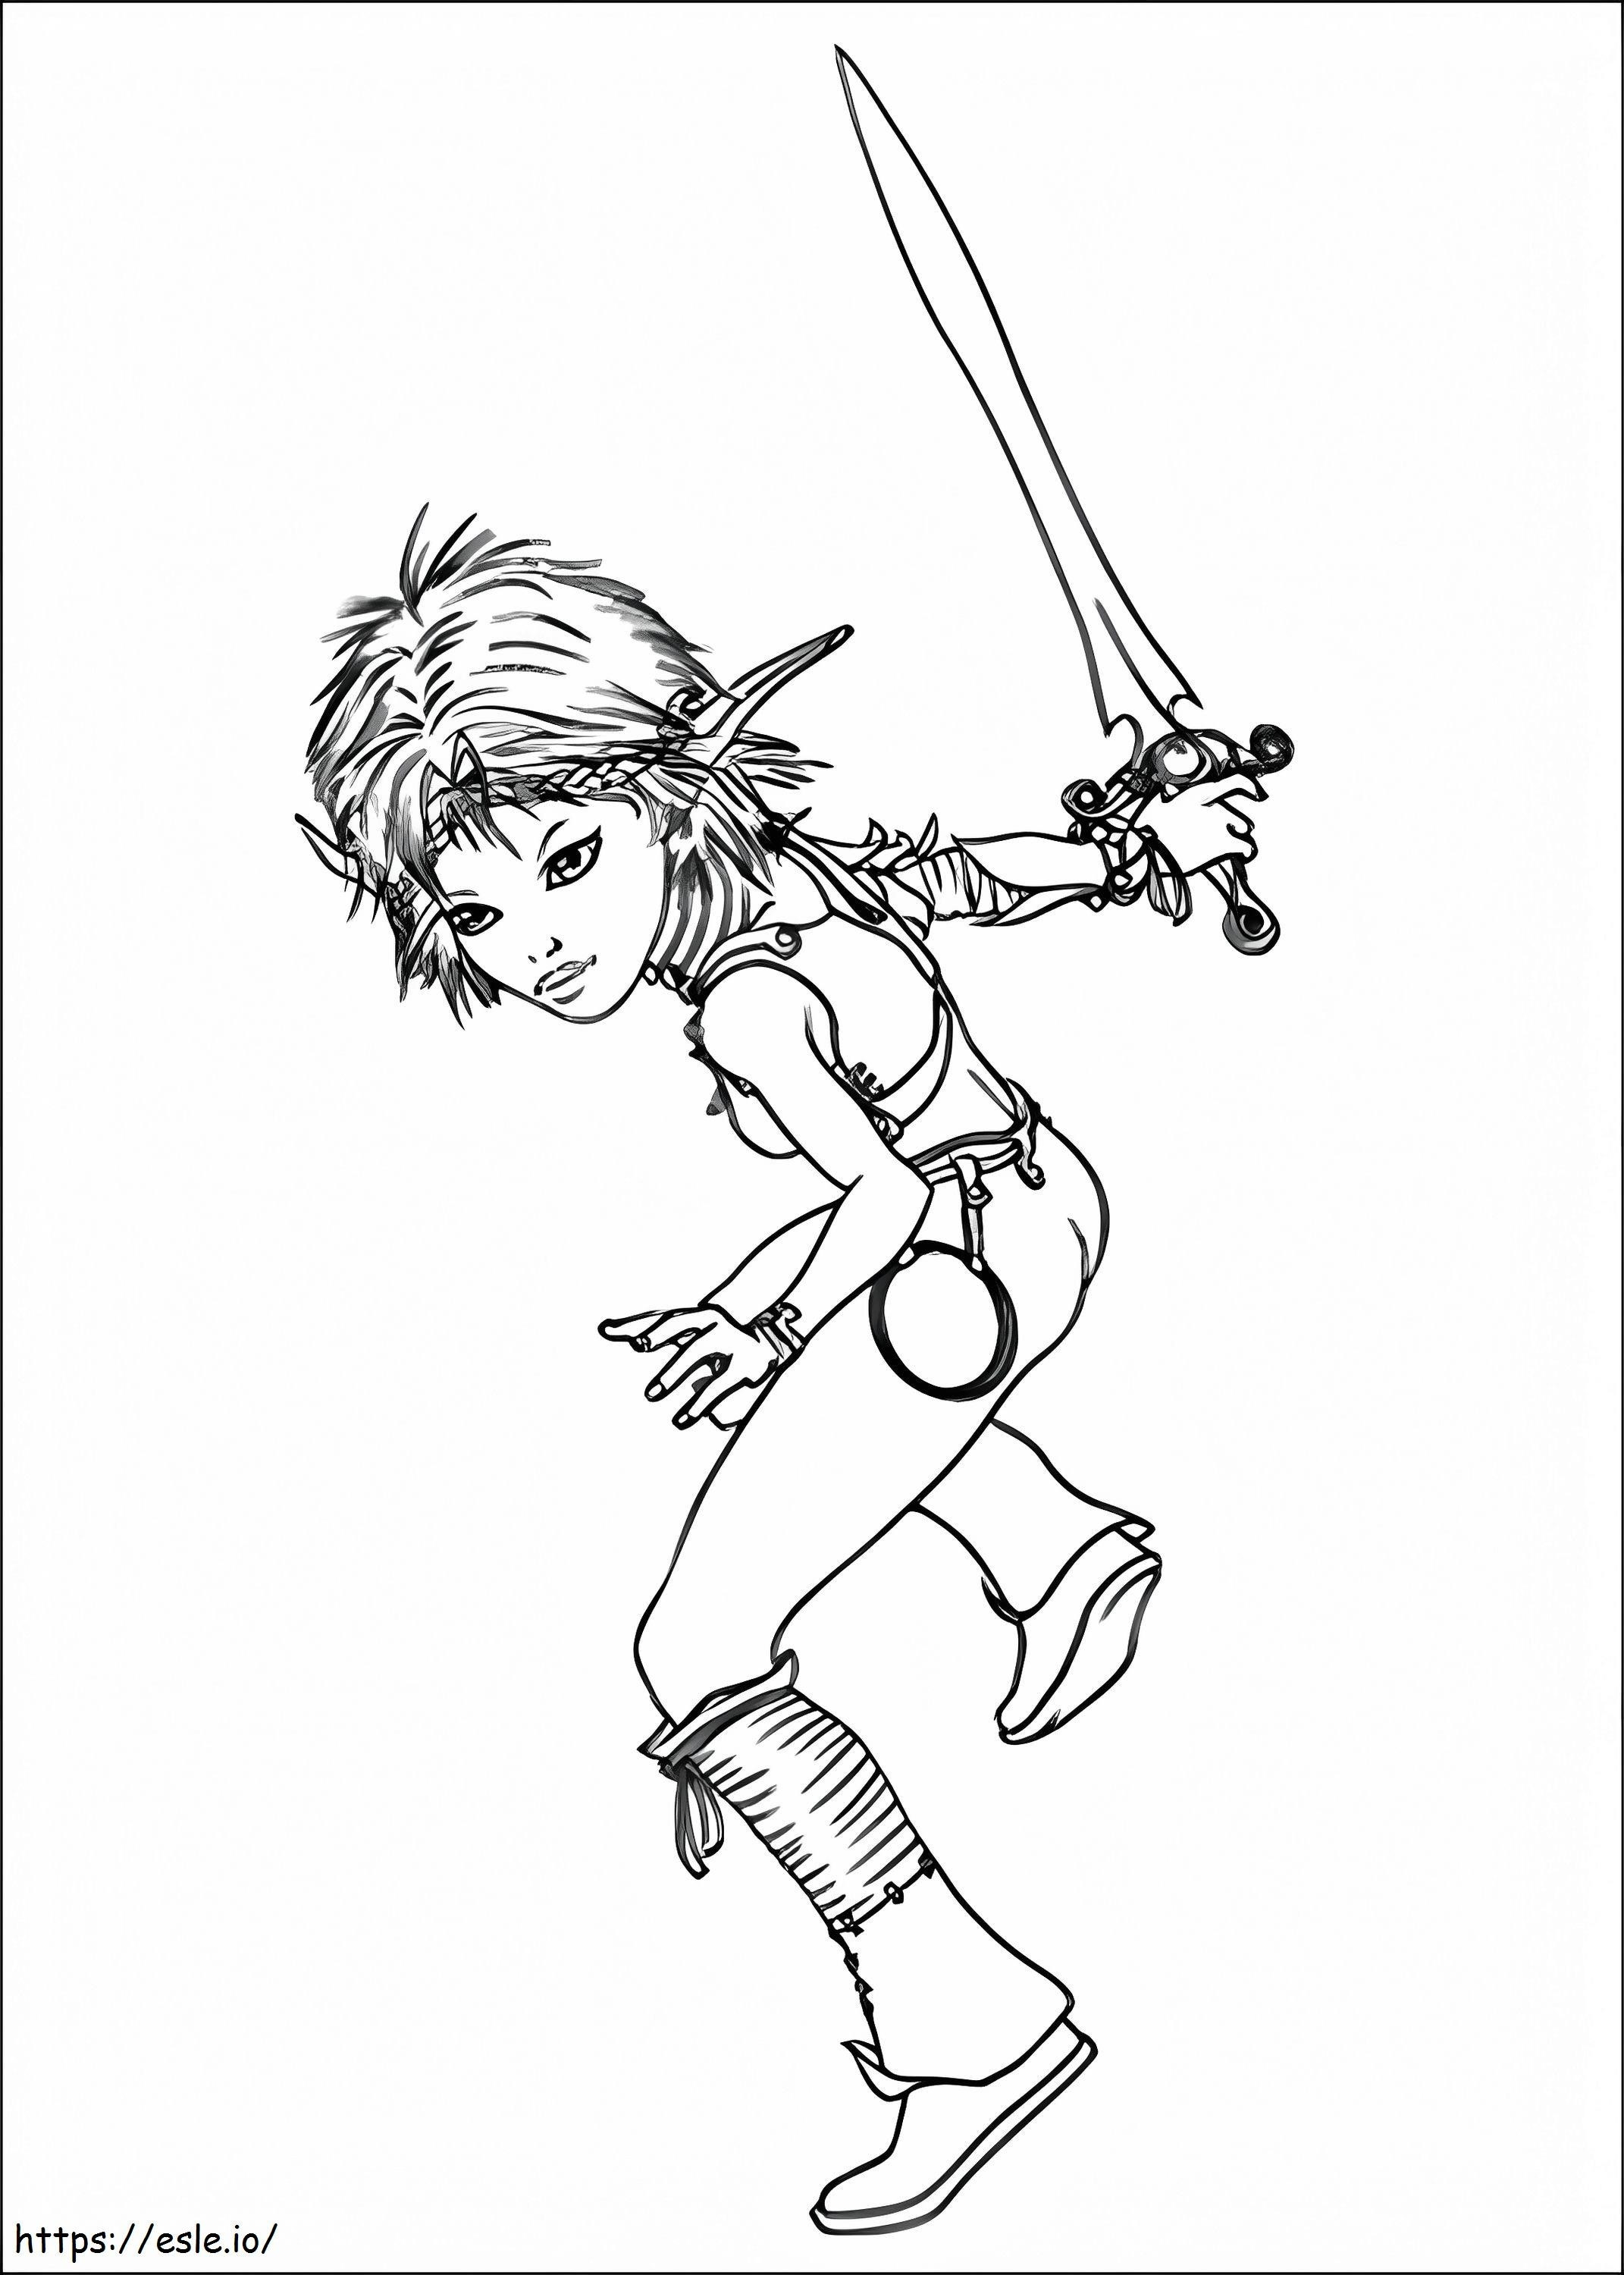 1533523593 Selenia Fighting A4 coloring page